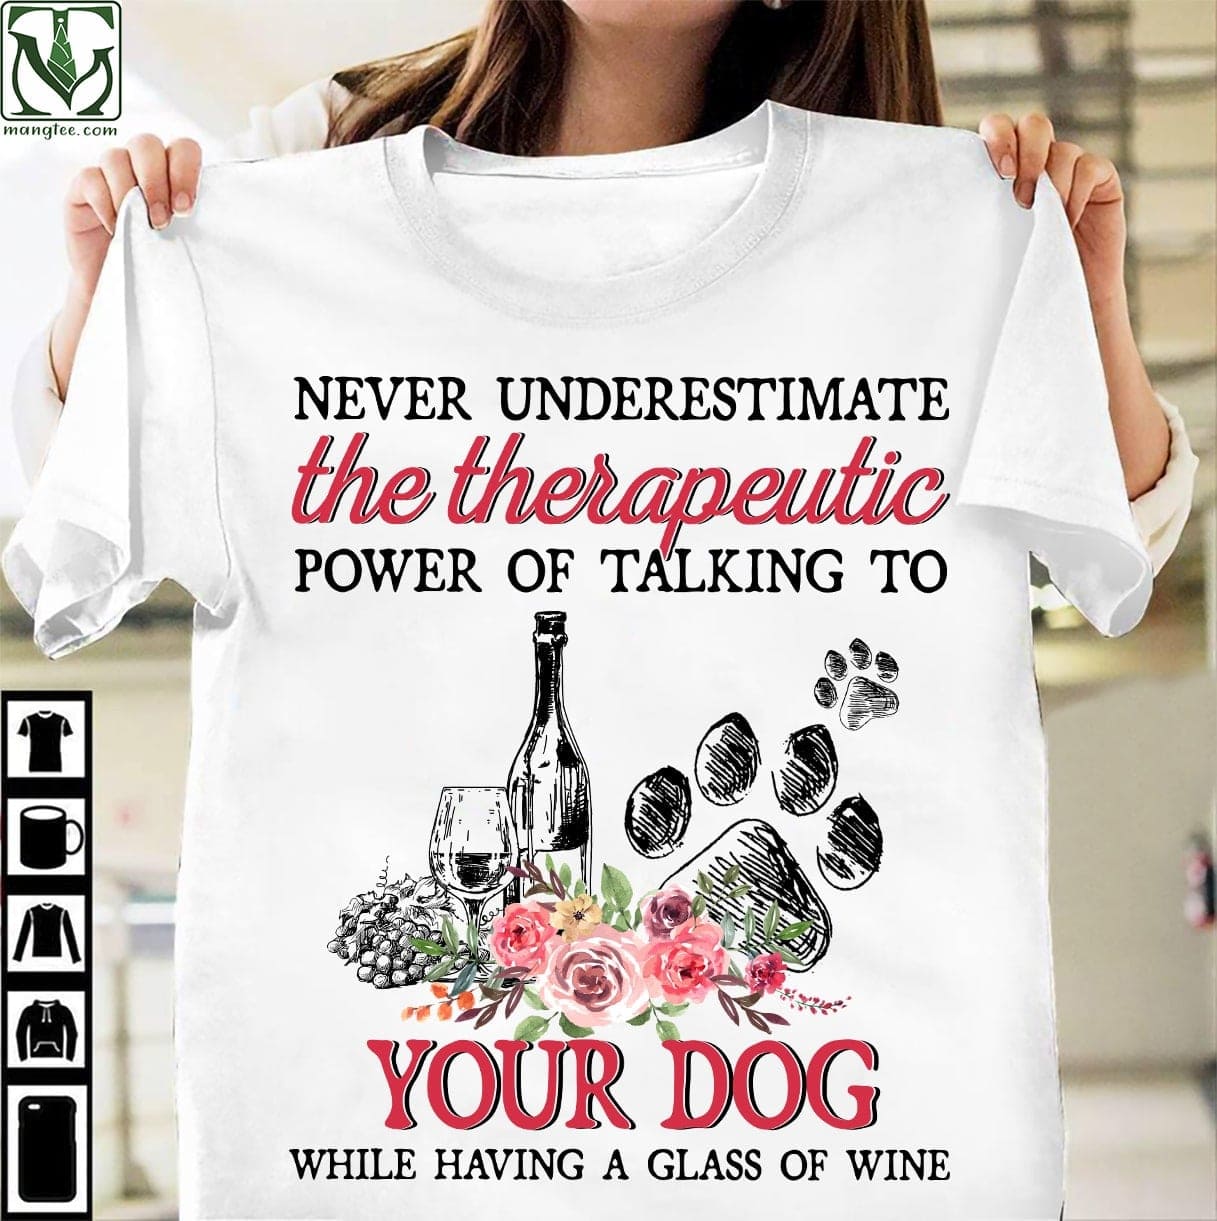 Wine Dog - Never underestimate the therapeutic power of talking to your dog while having a glass of wine